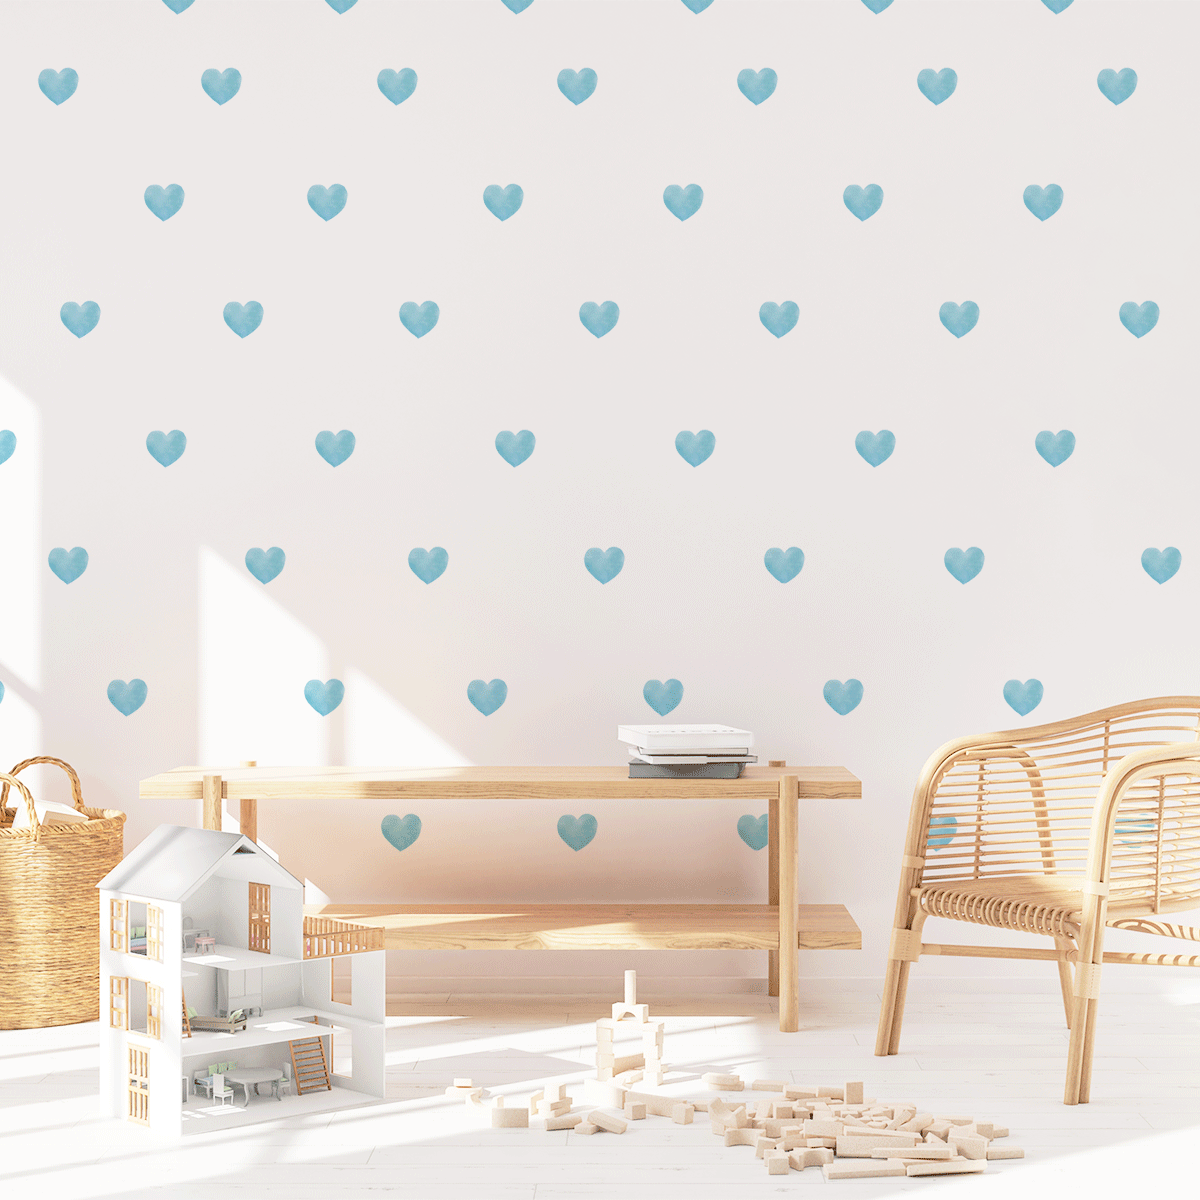 Hearts wall stickers - Blue watercolour hearts